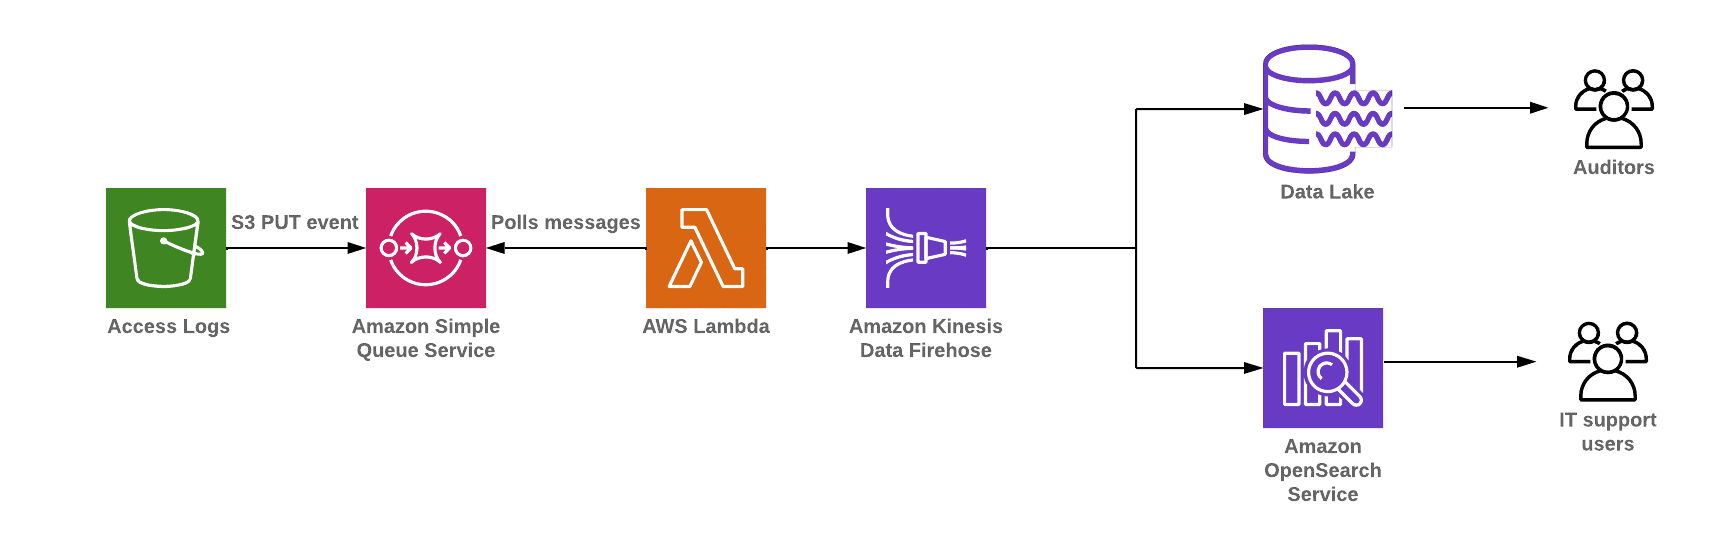 https://docs.aws.amazon.com/whitepapers/latest/build-modern-data-streaming-analytics-architectures/images/anomaly-detection.png